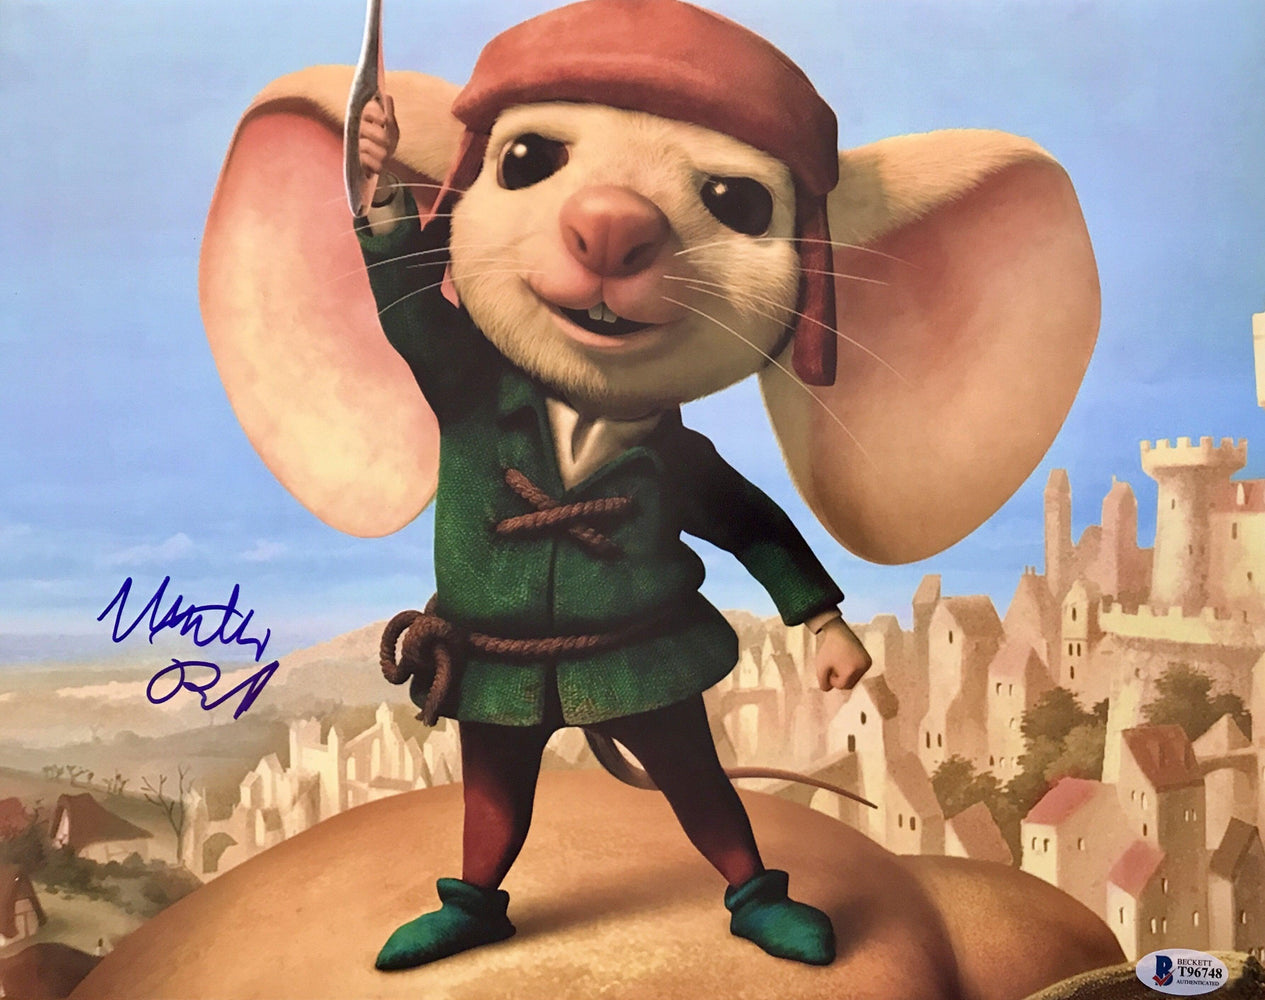 mathew broderick signed 11x14 as despereaux in the tale of despereaux bas t96748 certificate of authenticity